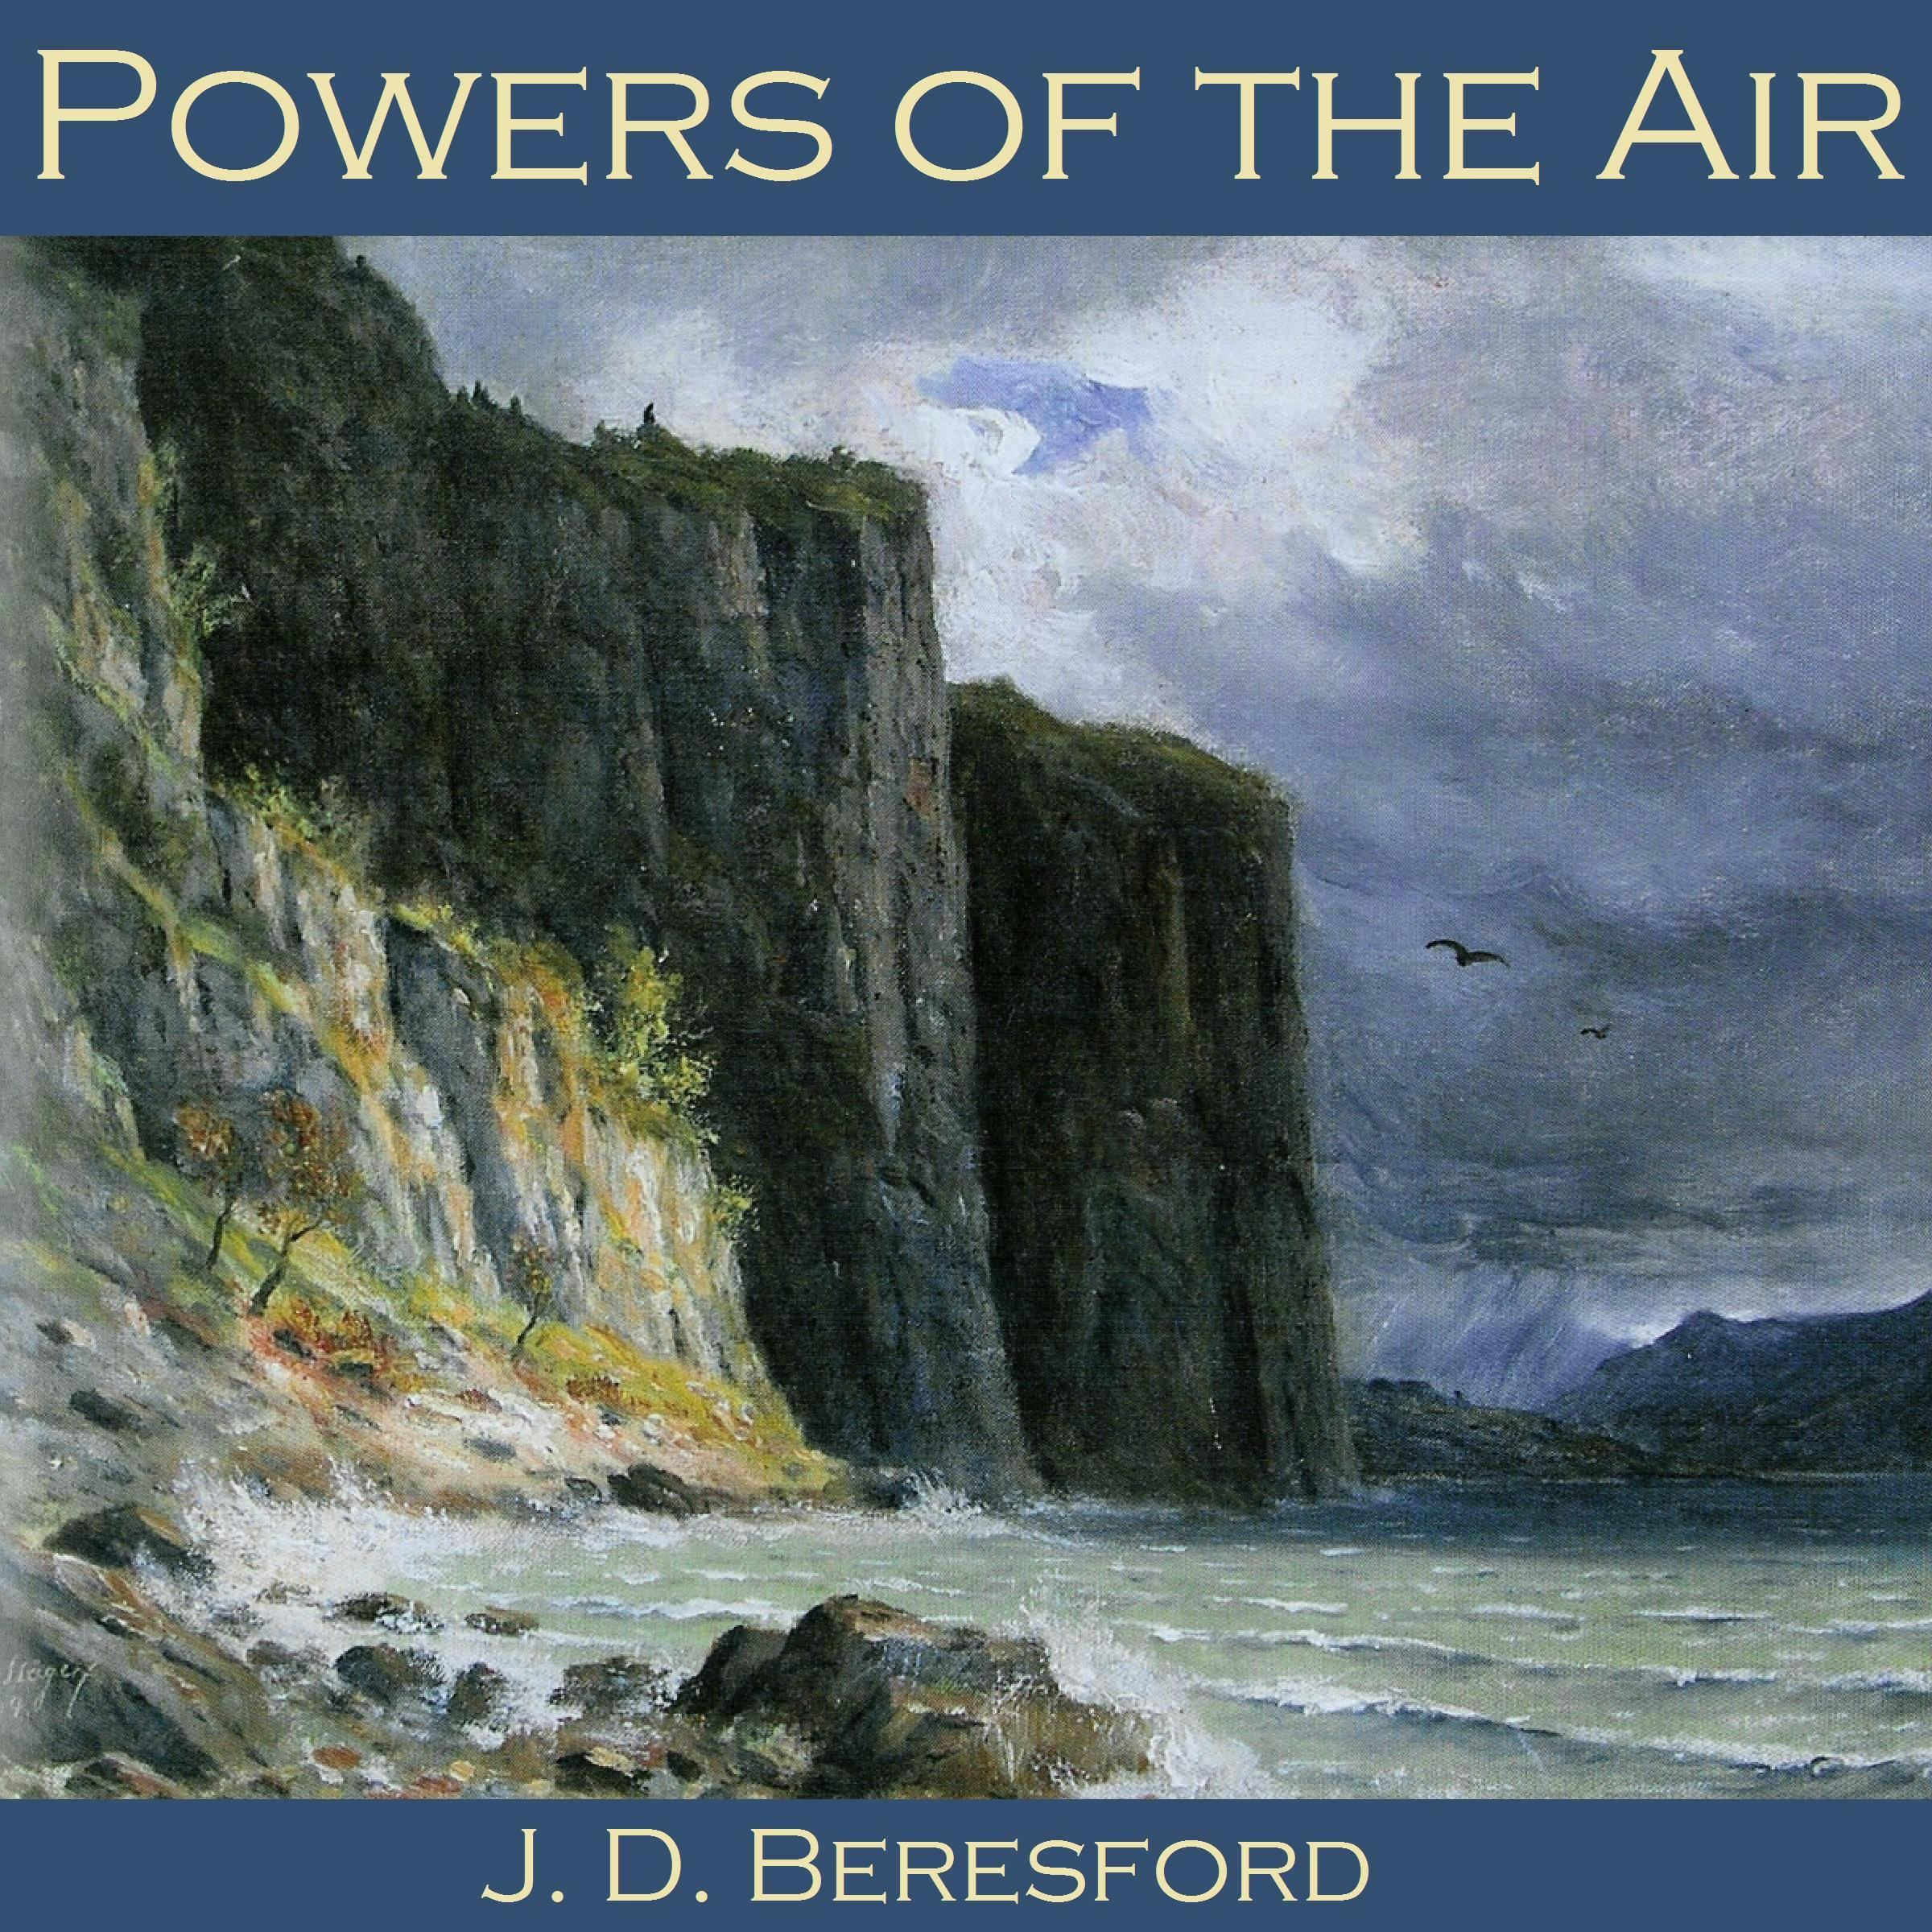 Powers of the Air - J.D. Beresford